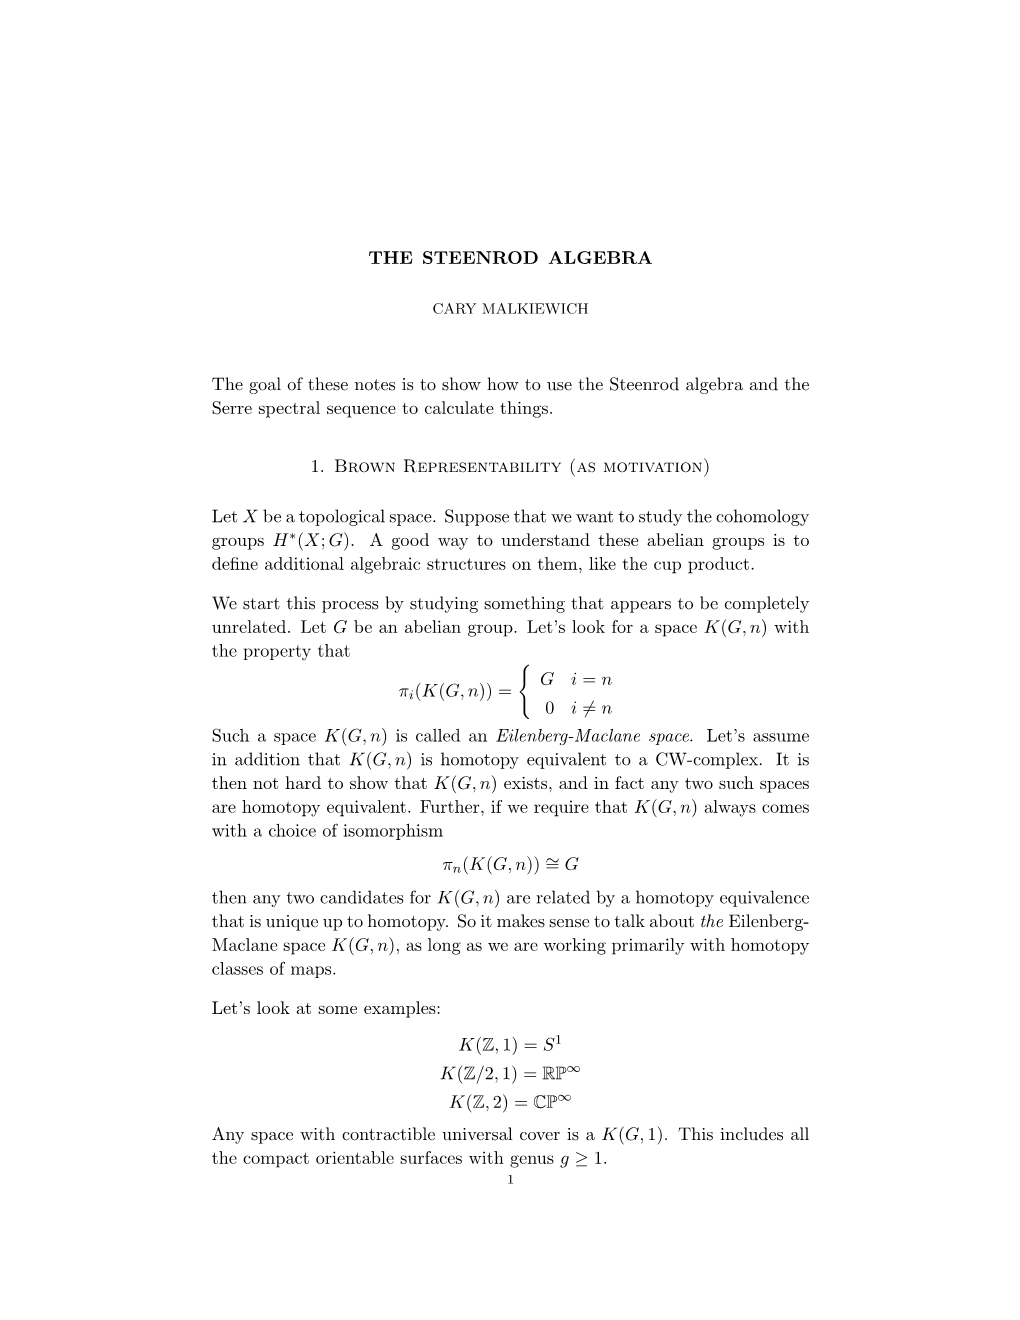 THE STEENROD ALGEBRA the Goal of These Notes Is to Show How to Use the Steenrod Algebra and the Serre Spectral Sequence to Calcu